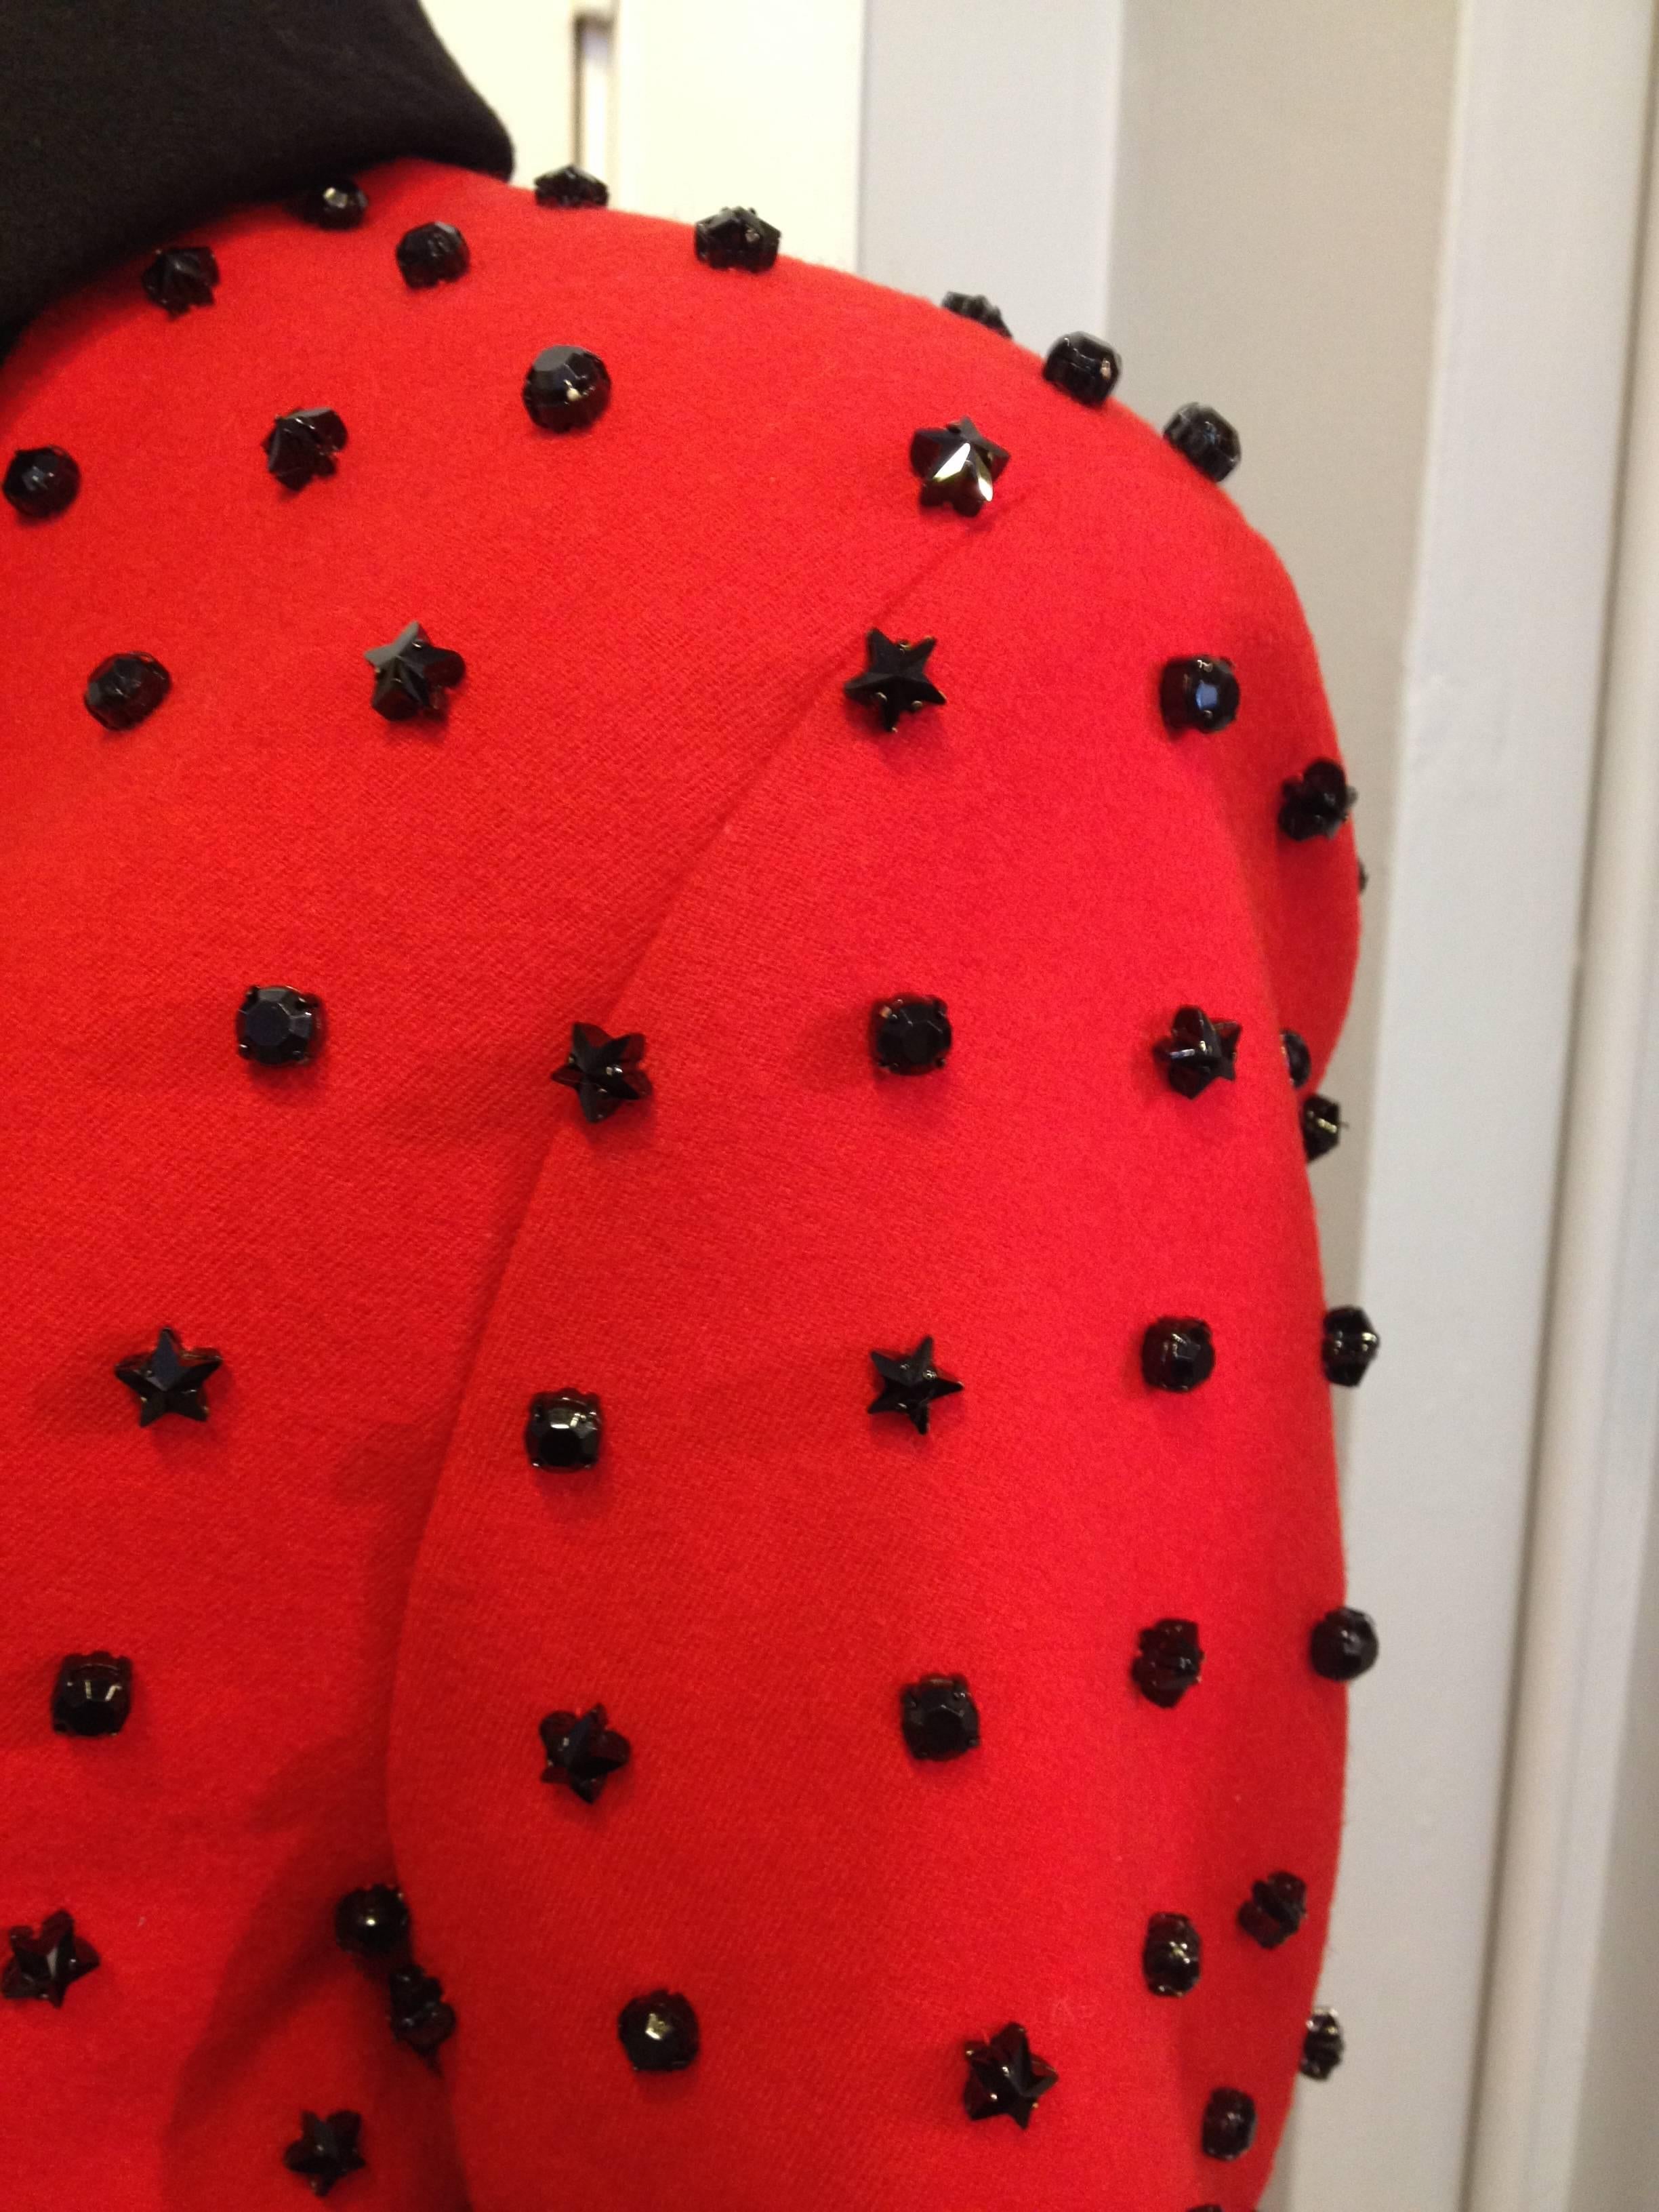 Givenchy Red Runway Jacket Black Star Embellishment Fall-Winter 2012-2013 Sz 38 For Sale 1